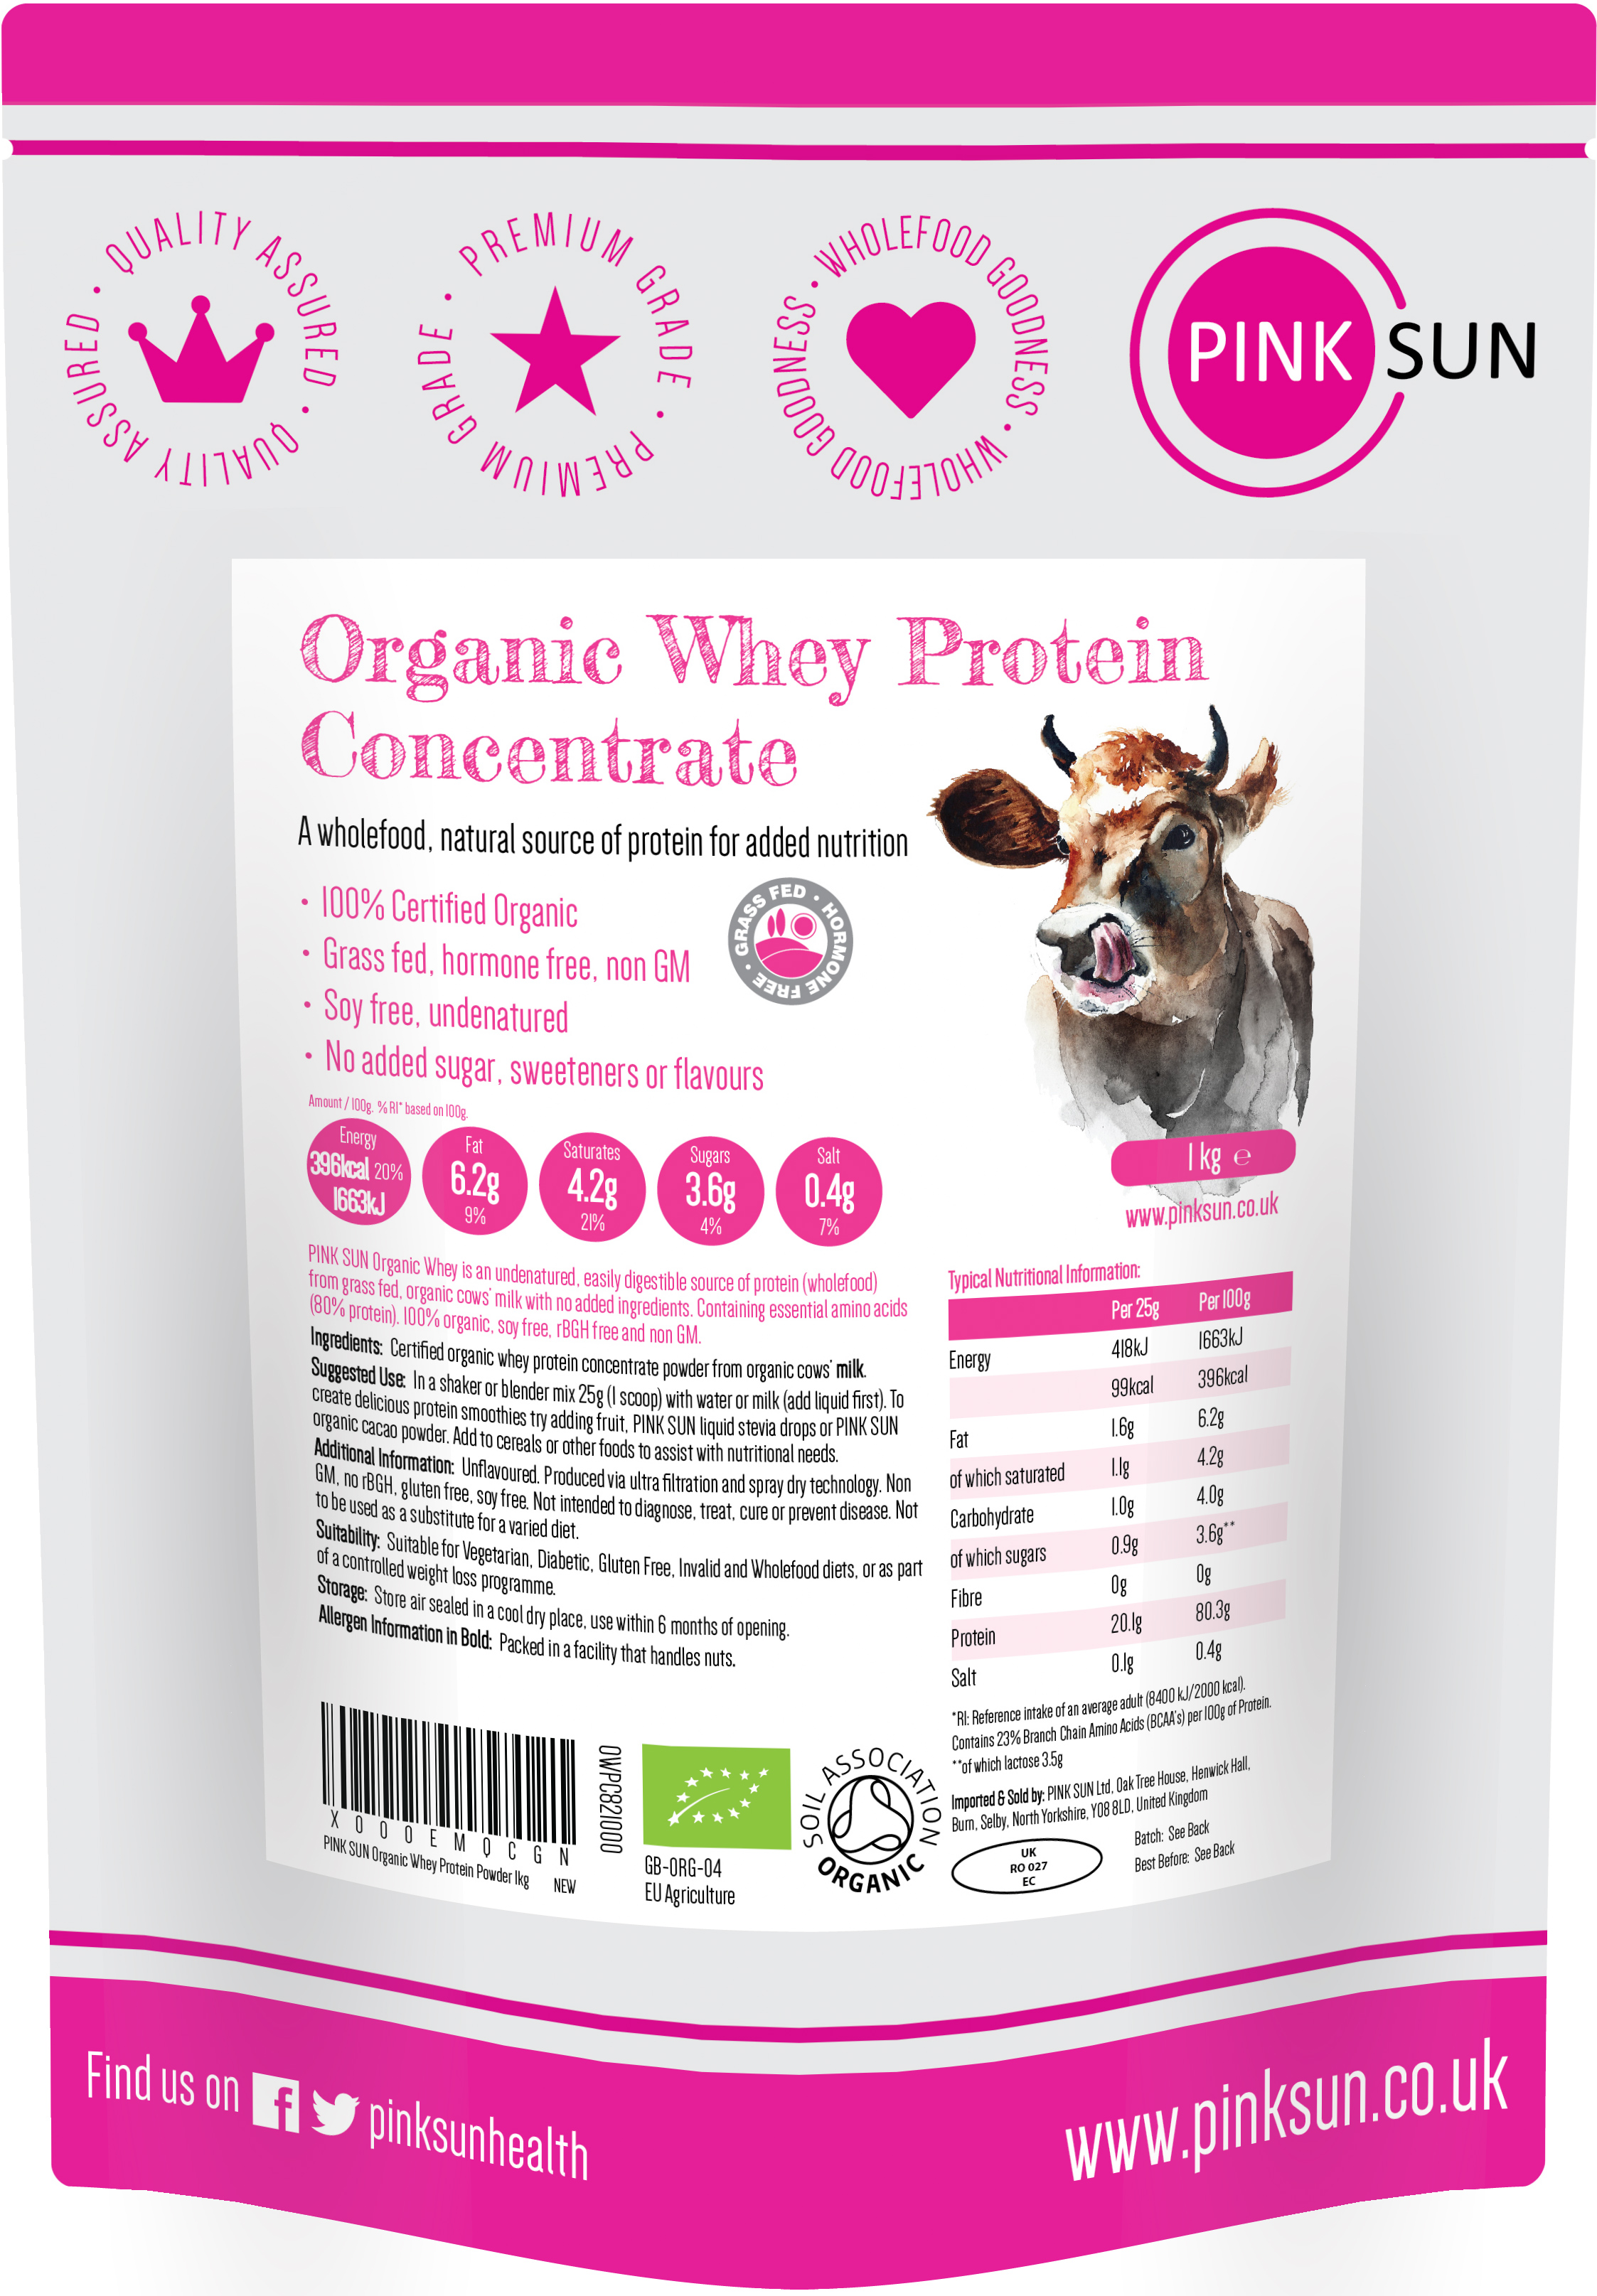 Organic Whey Protein Concentrate